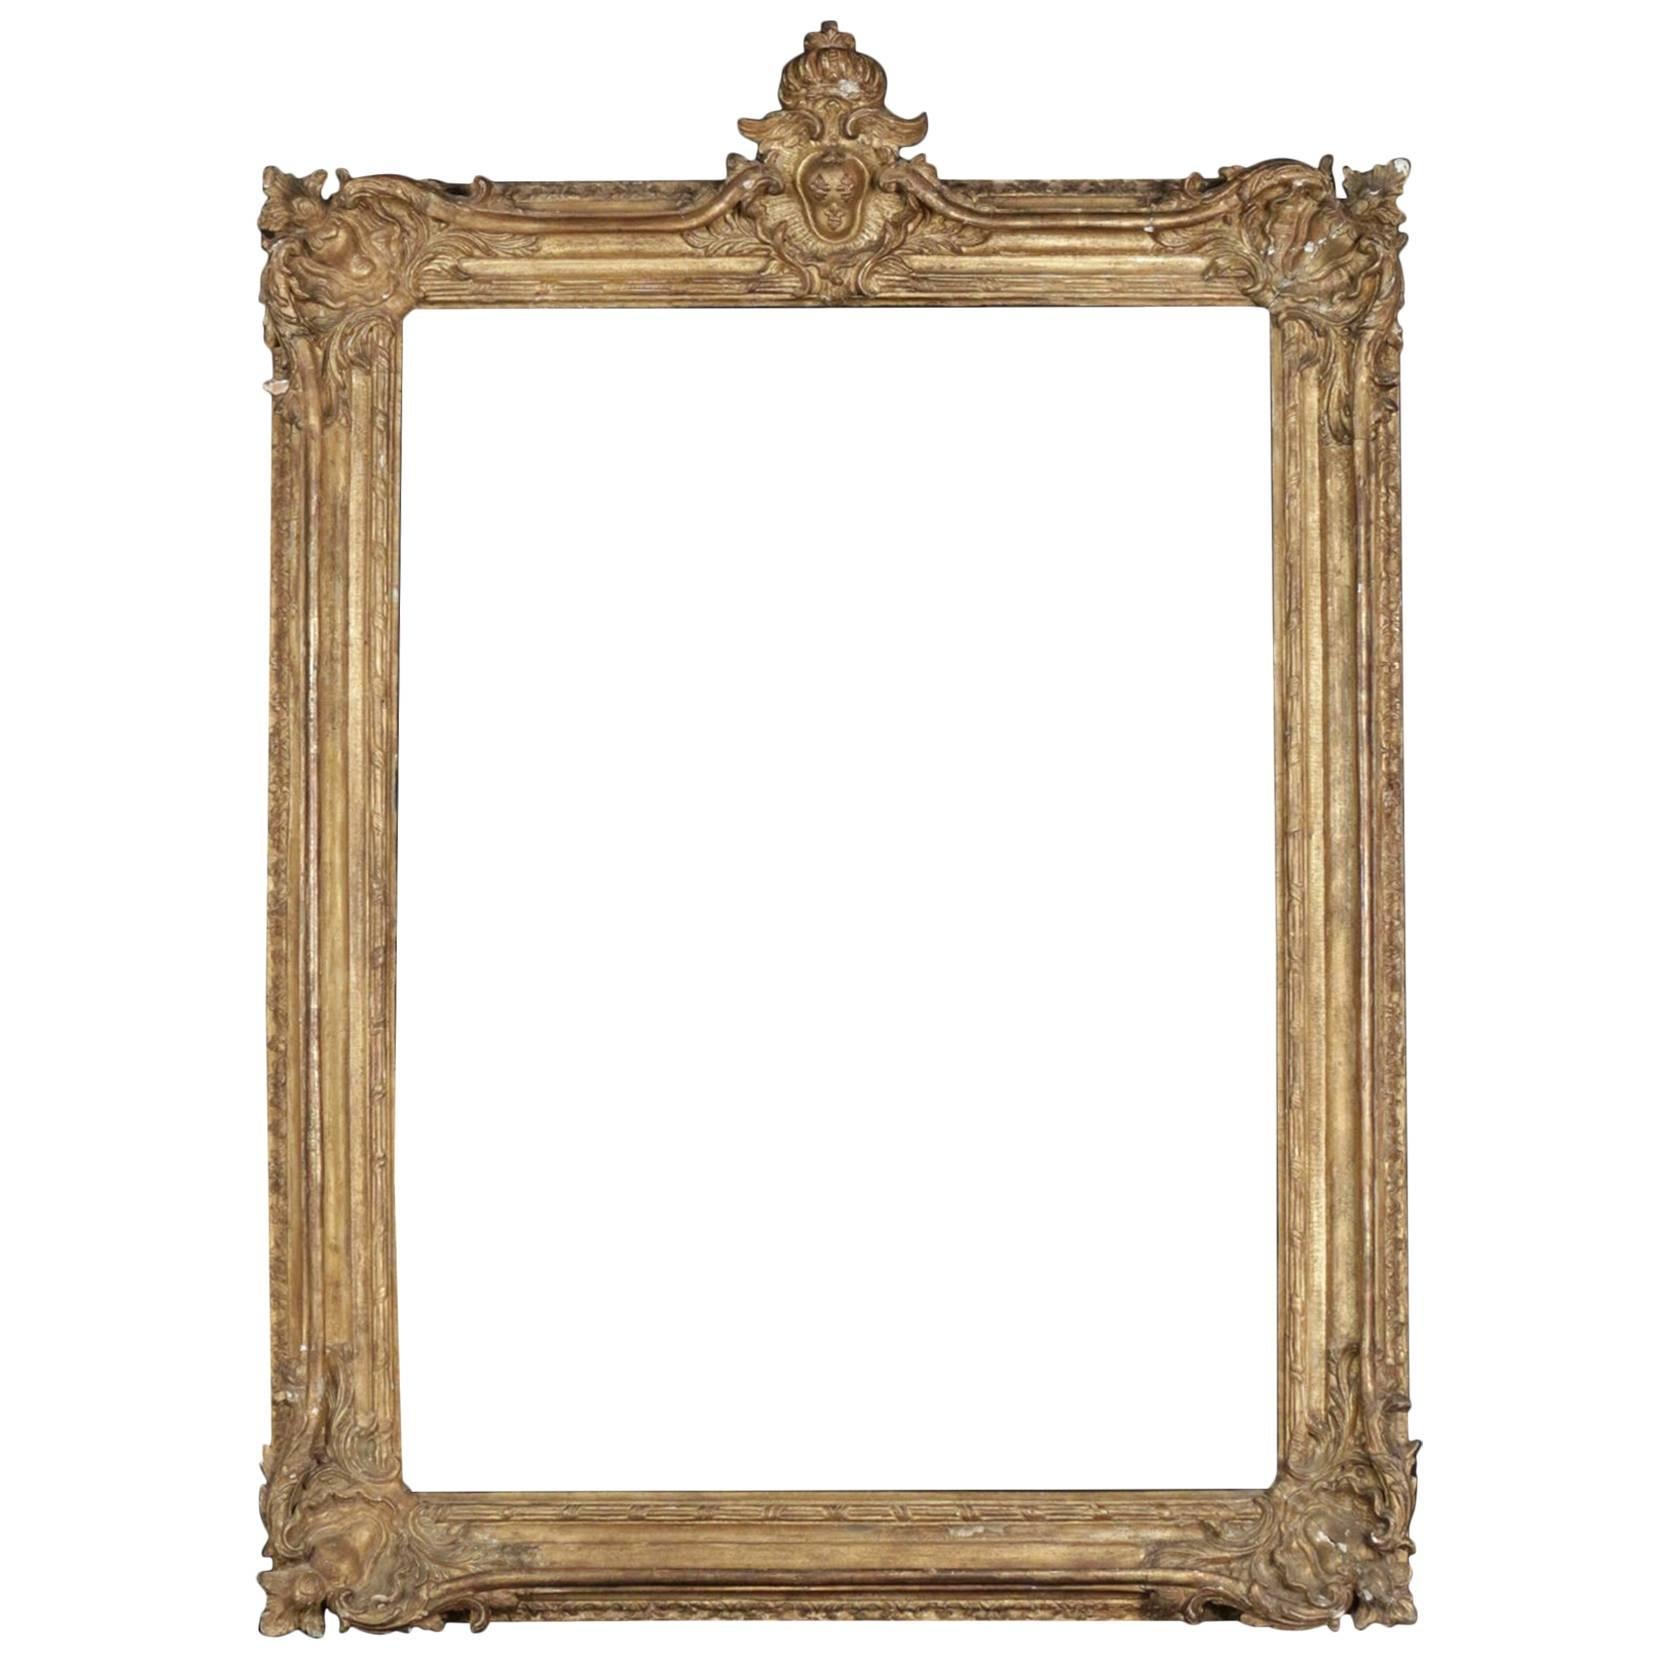 Exceptional Louis XV Period Royal Frame Mounted as Mirror, 18th Century